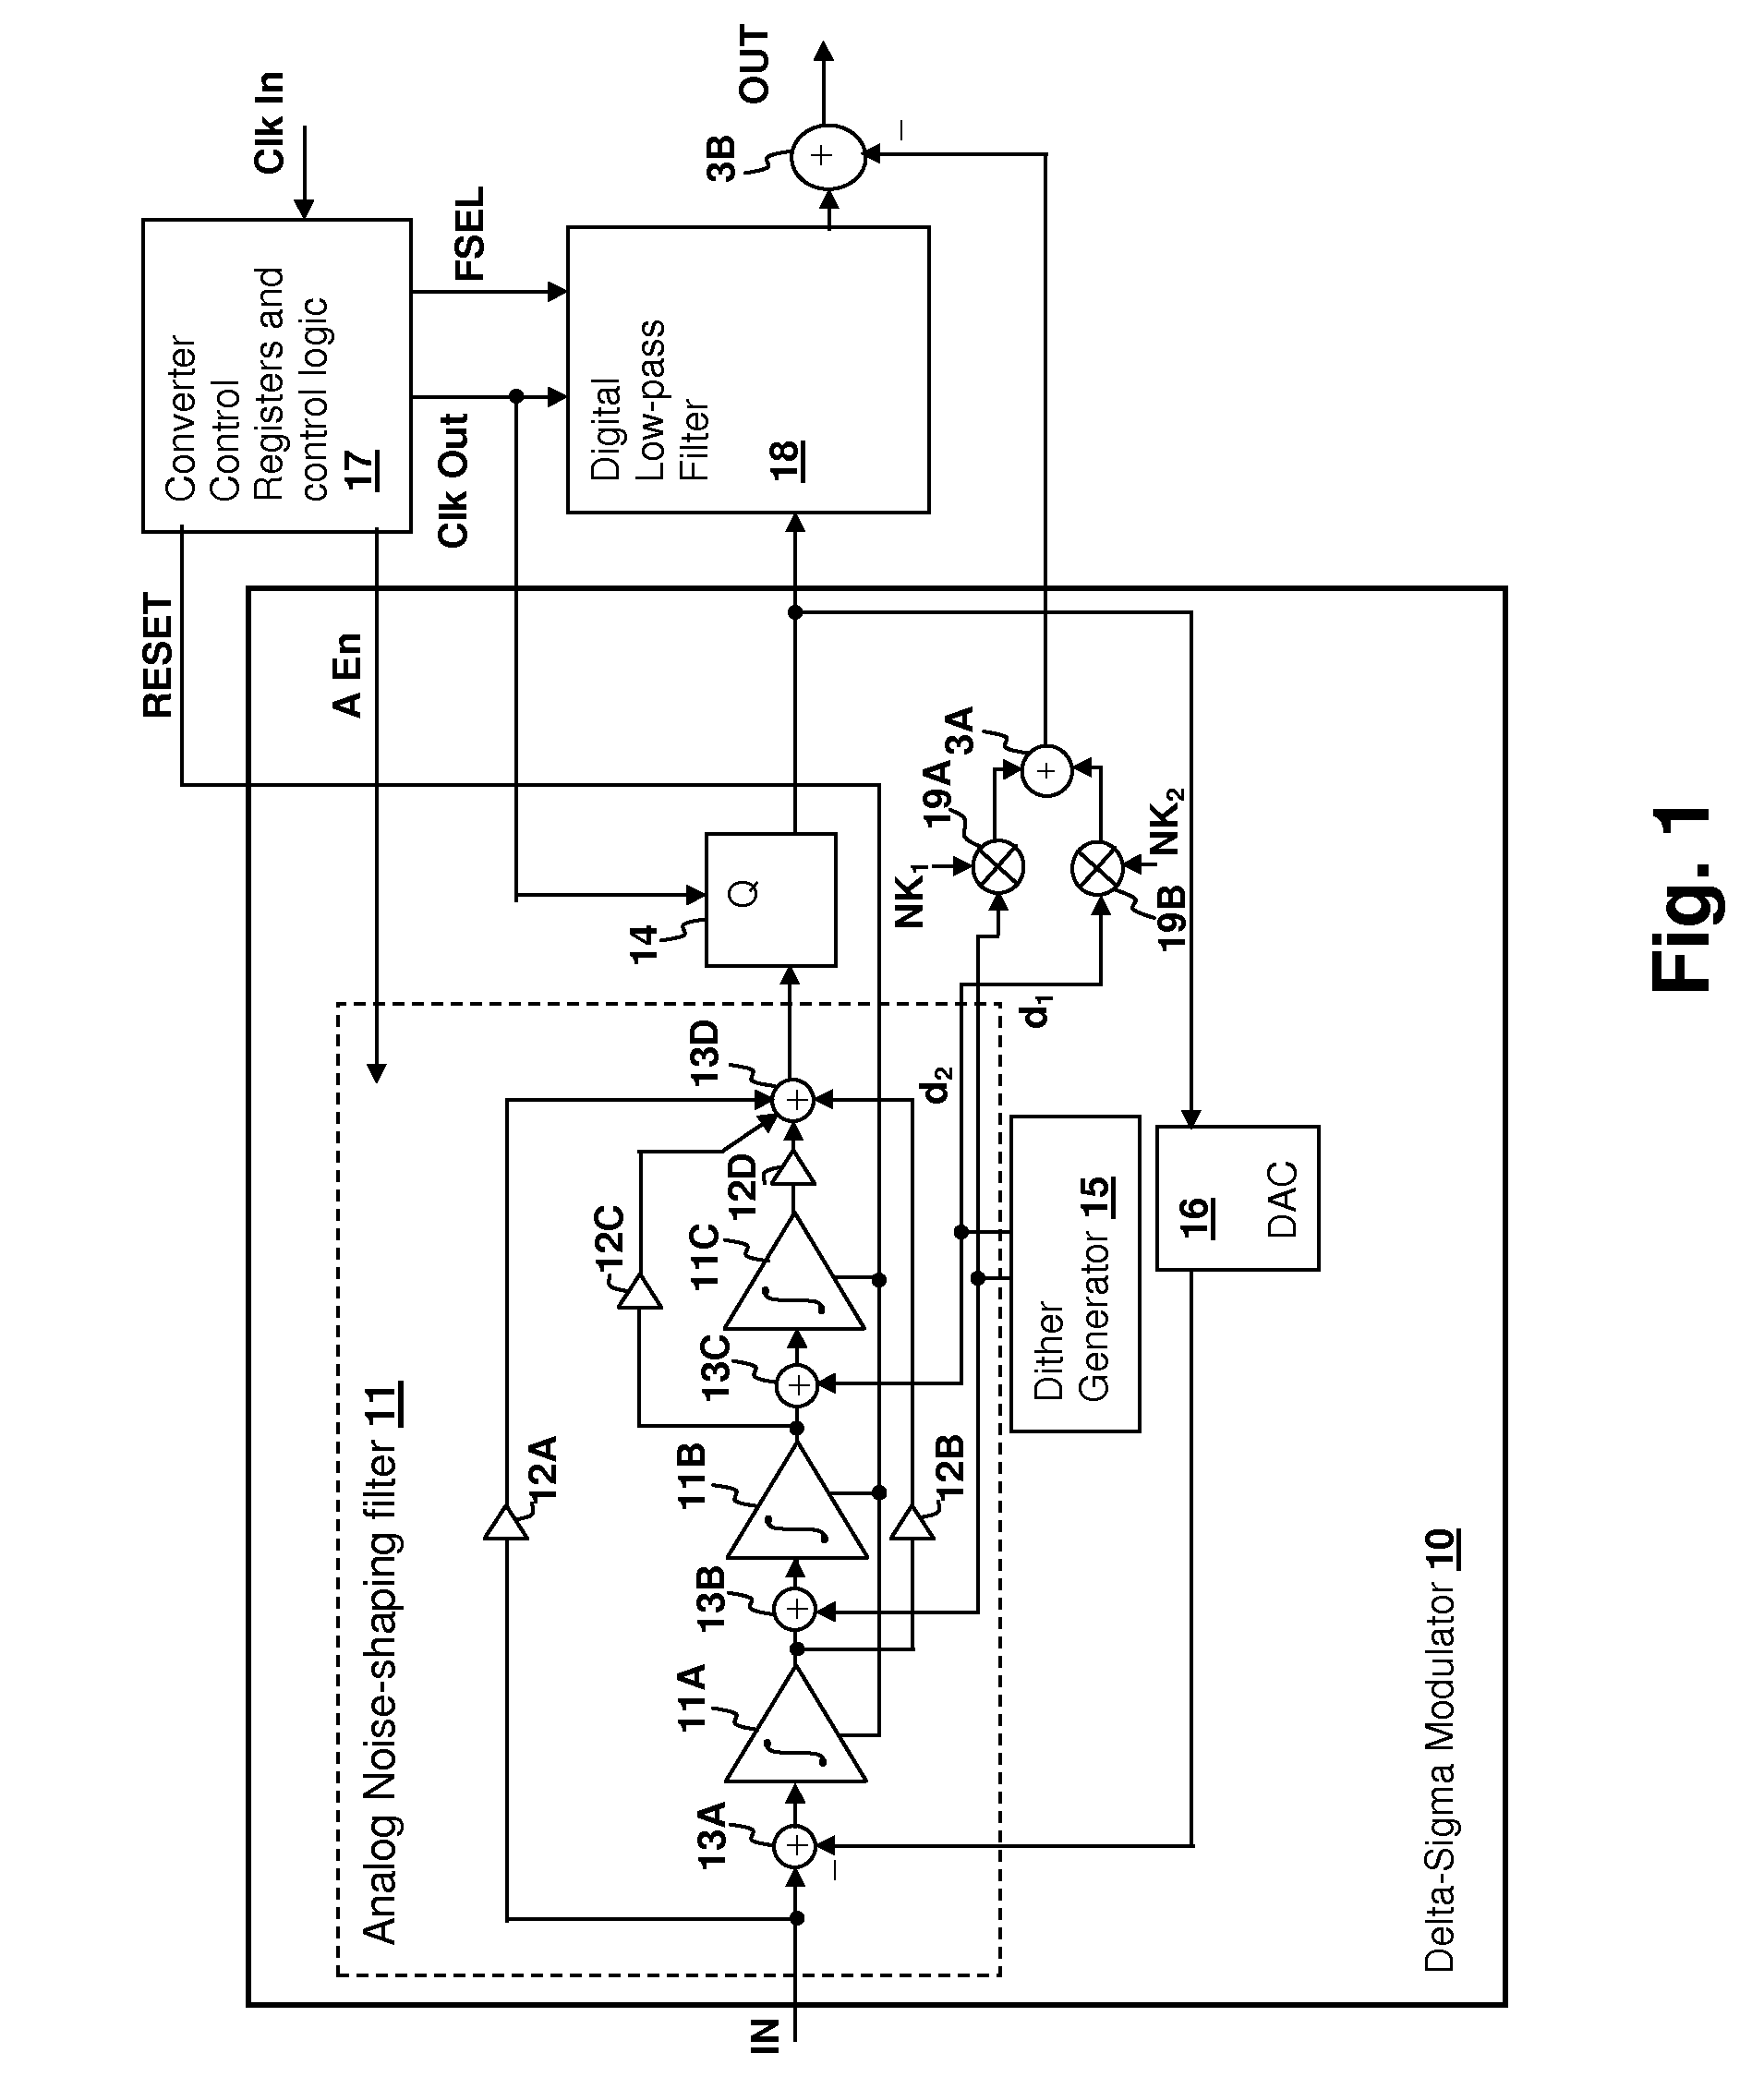 Analog-to-digital converter (ADC) having integrator dither injection and quantizer output compensation